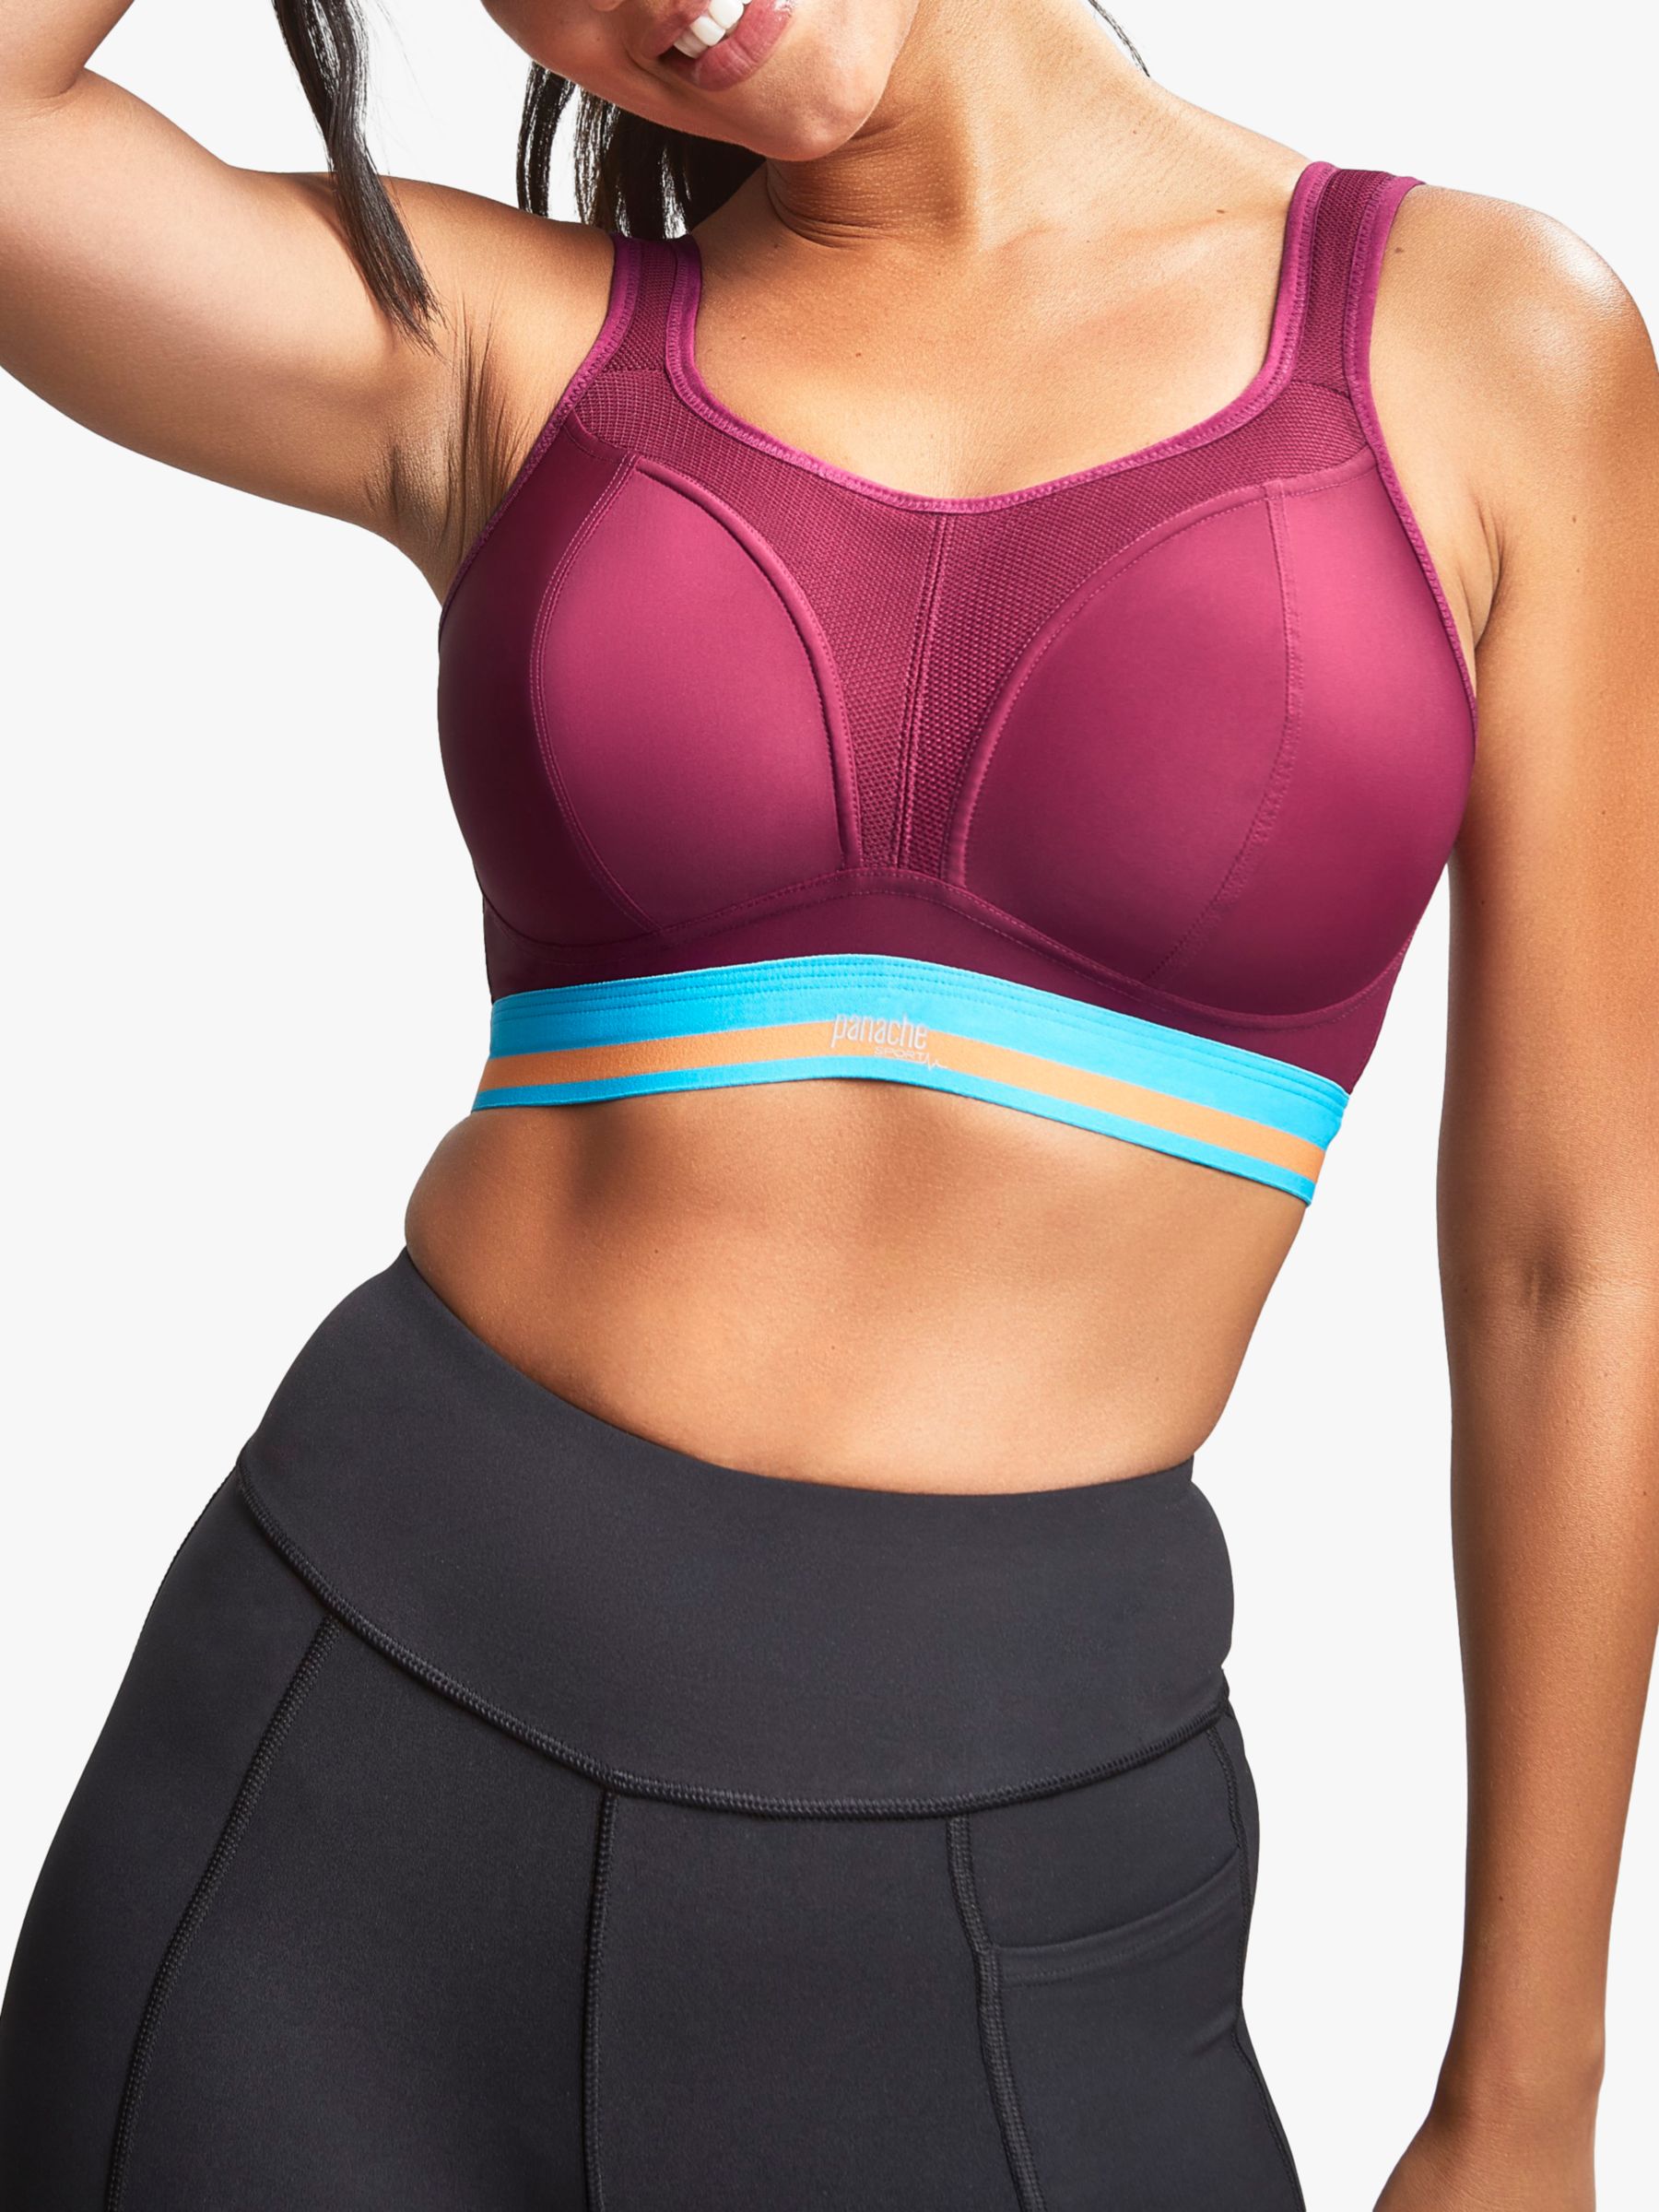 Panache Sport Underwired Sports Bra - Cyber Swirl Available at The Fitting  Room